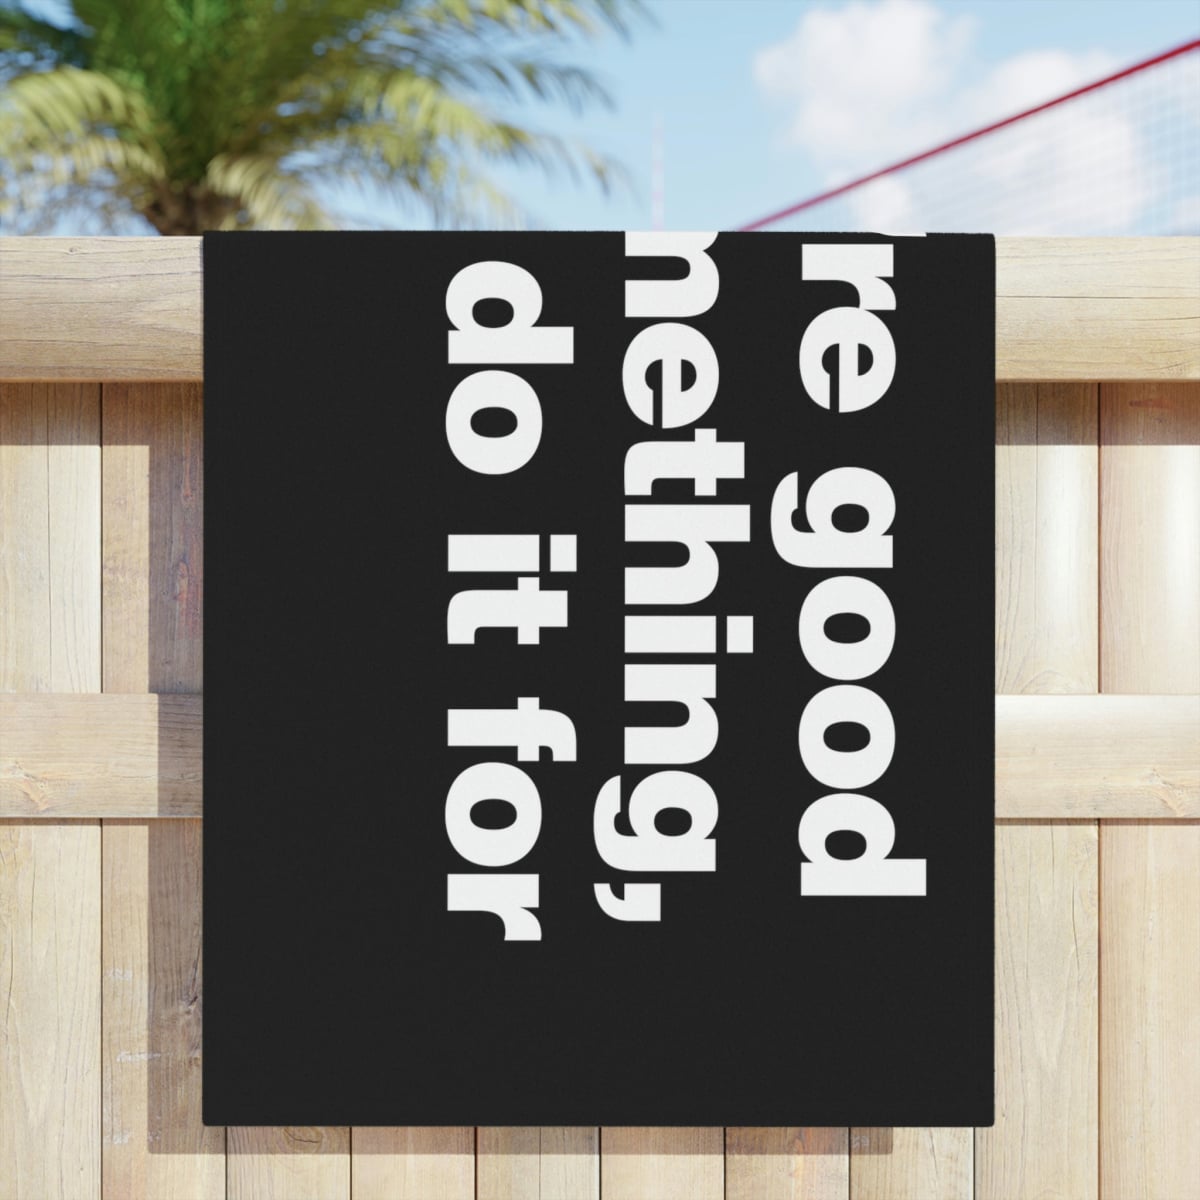 If You are good at something Beach Towels